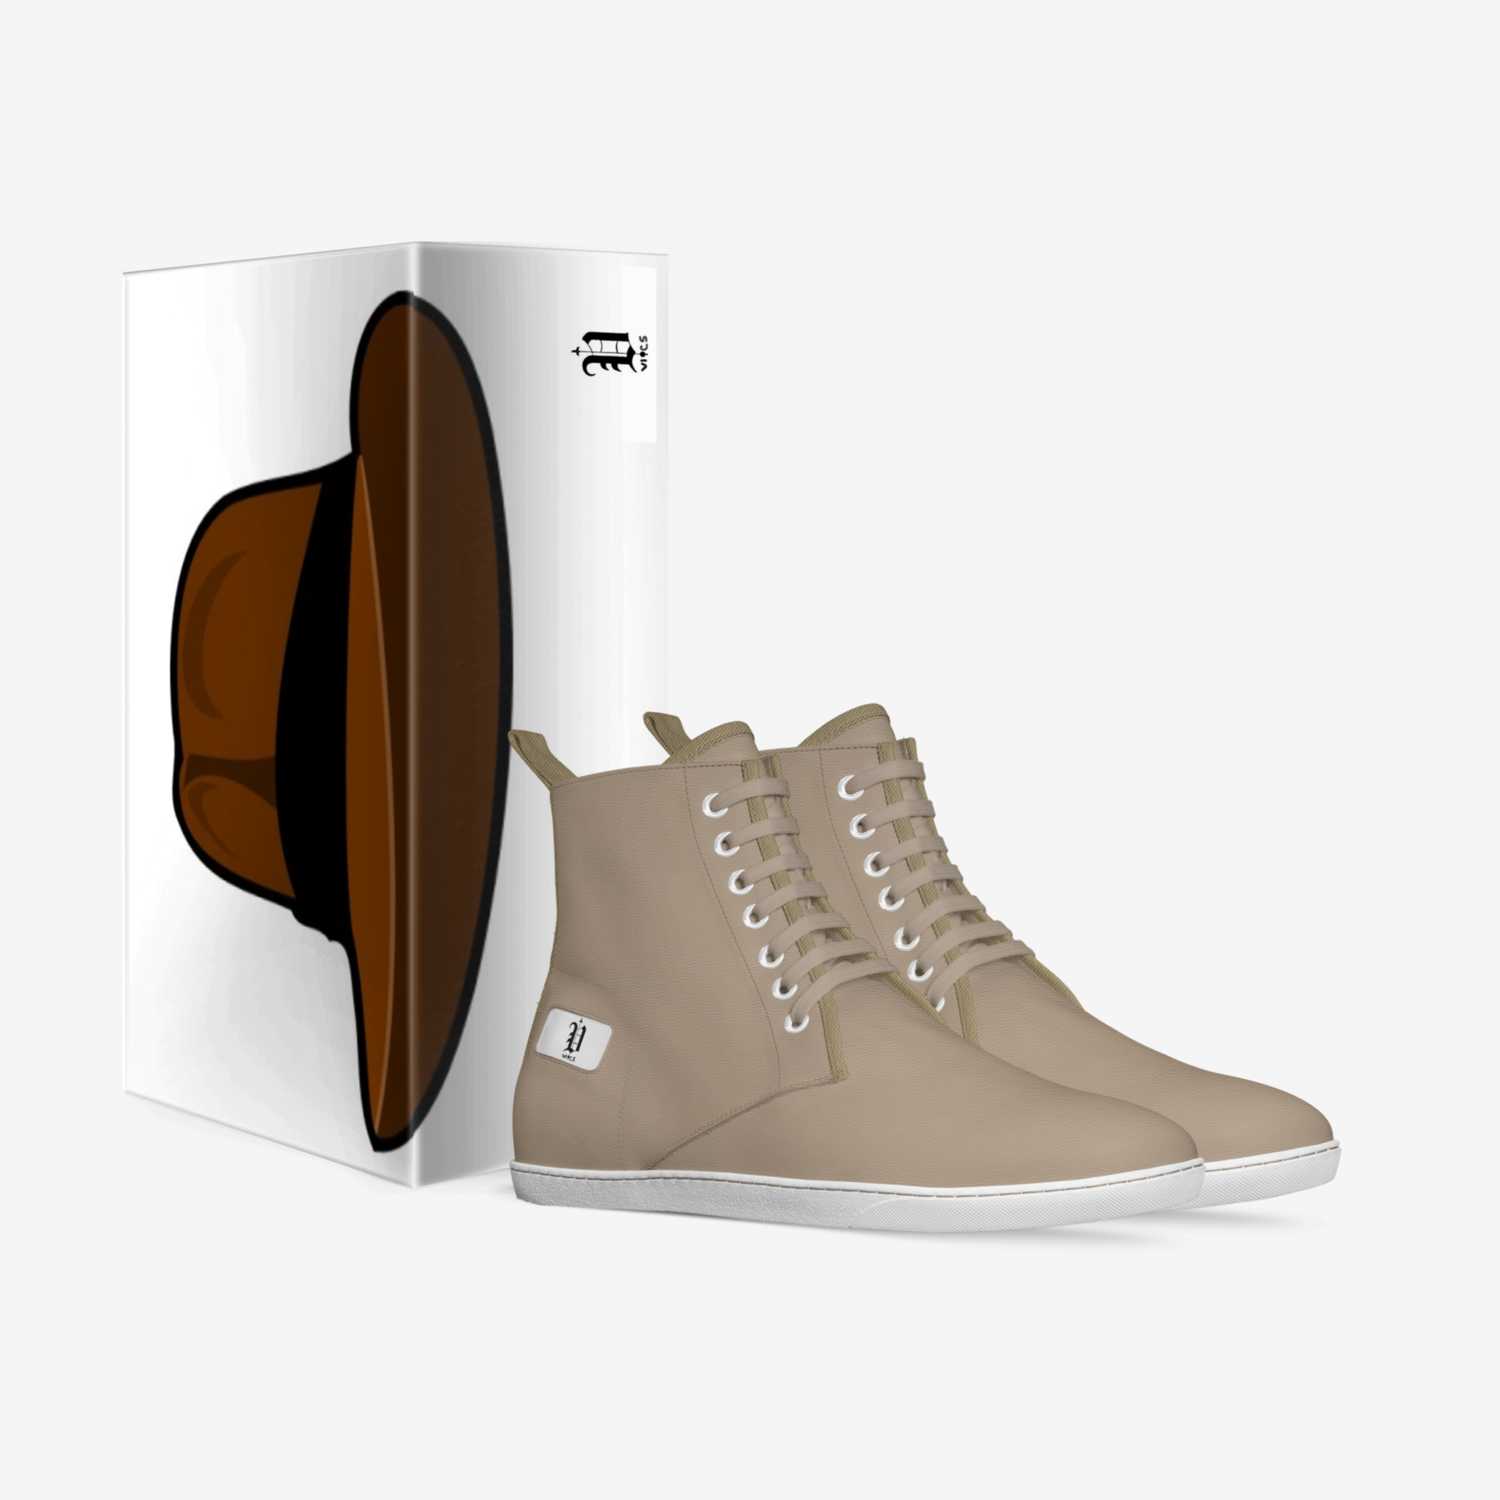 vics desert sand custom made in Italy shoes by Brayden Murphy | Box view